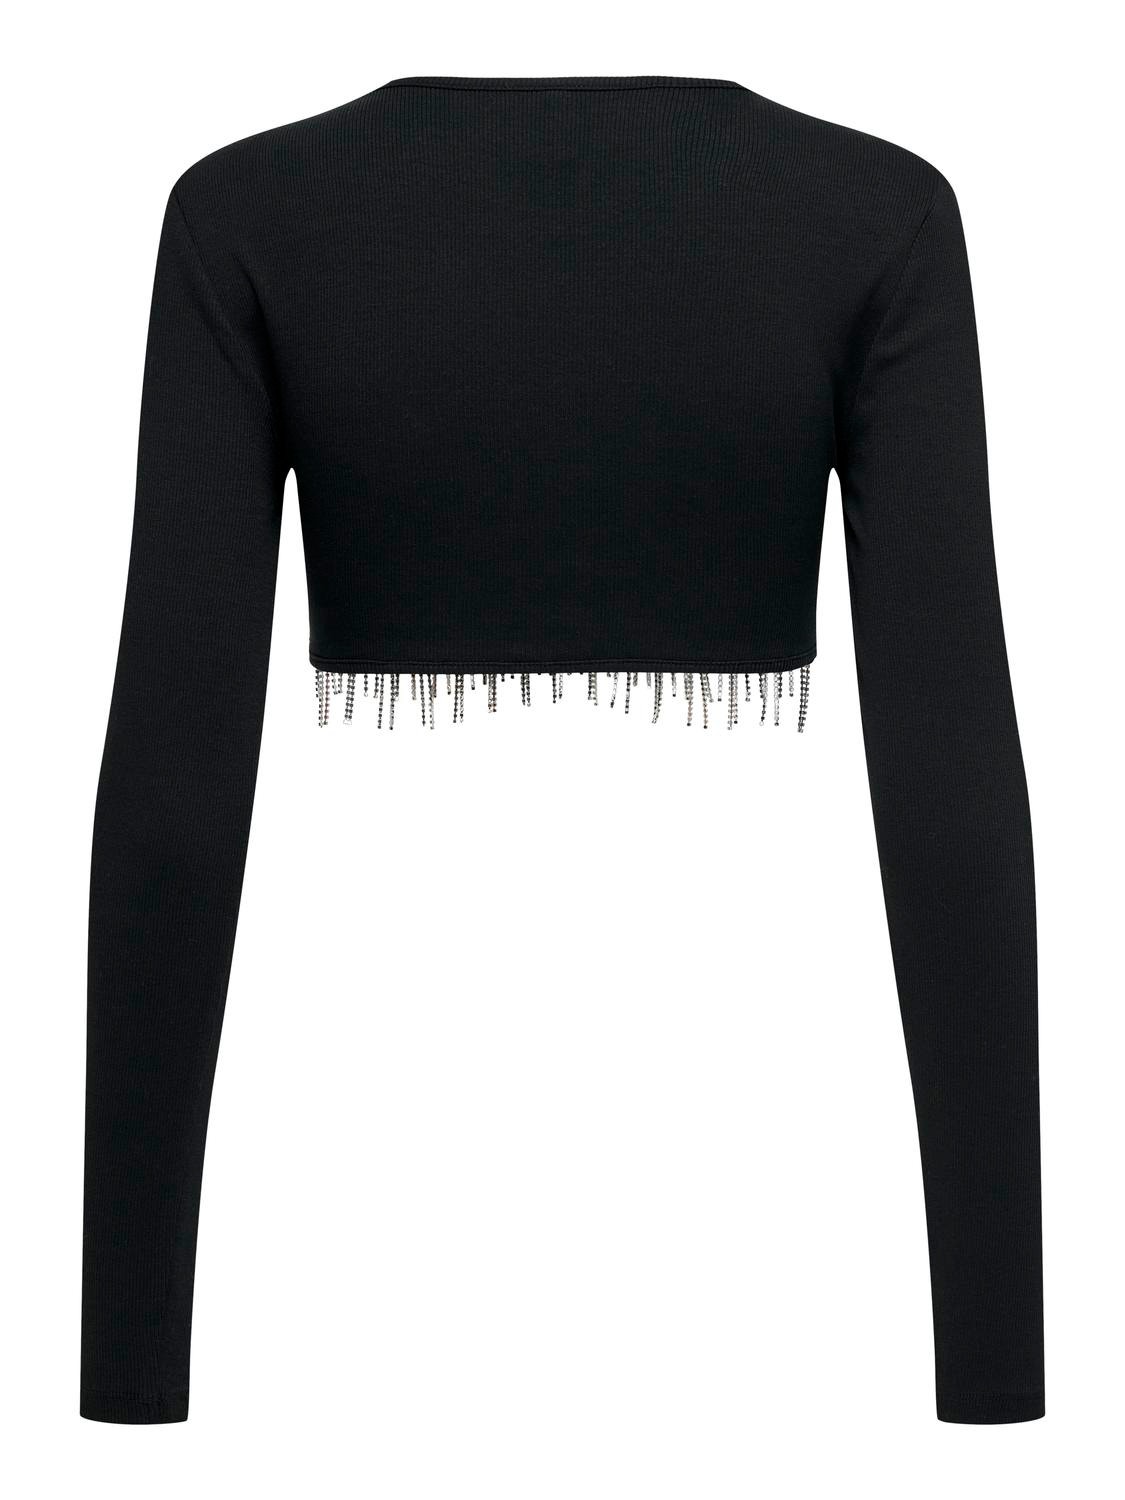 ONLY Cropped o-neck top -Black - 15309819